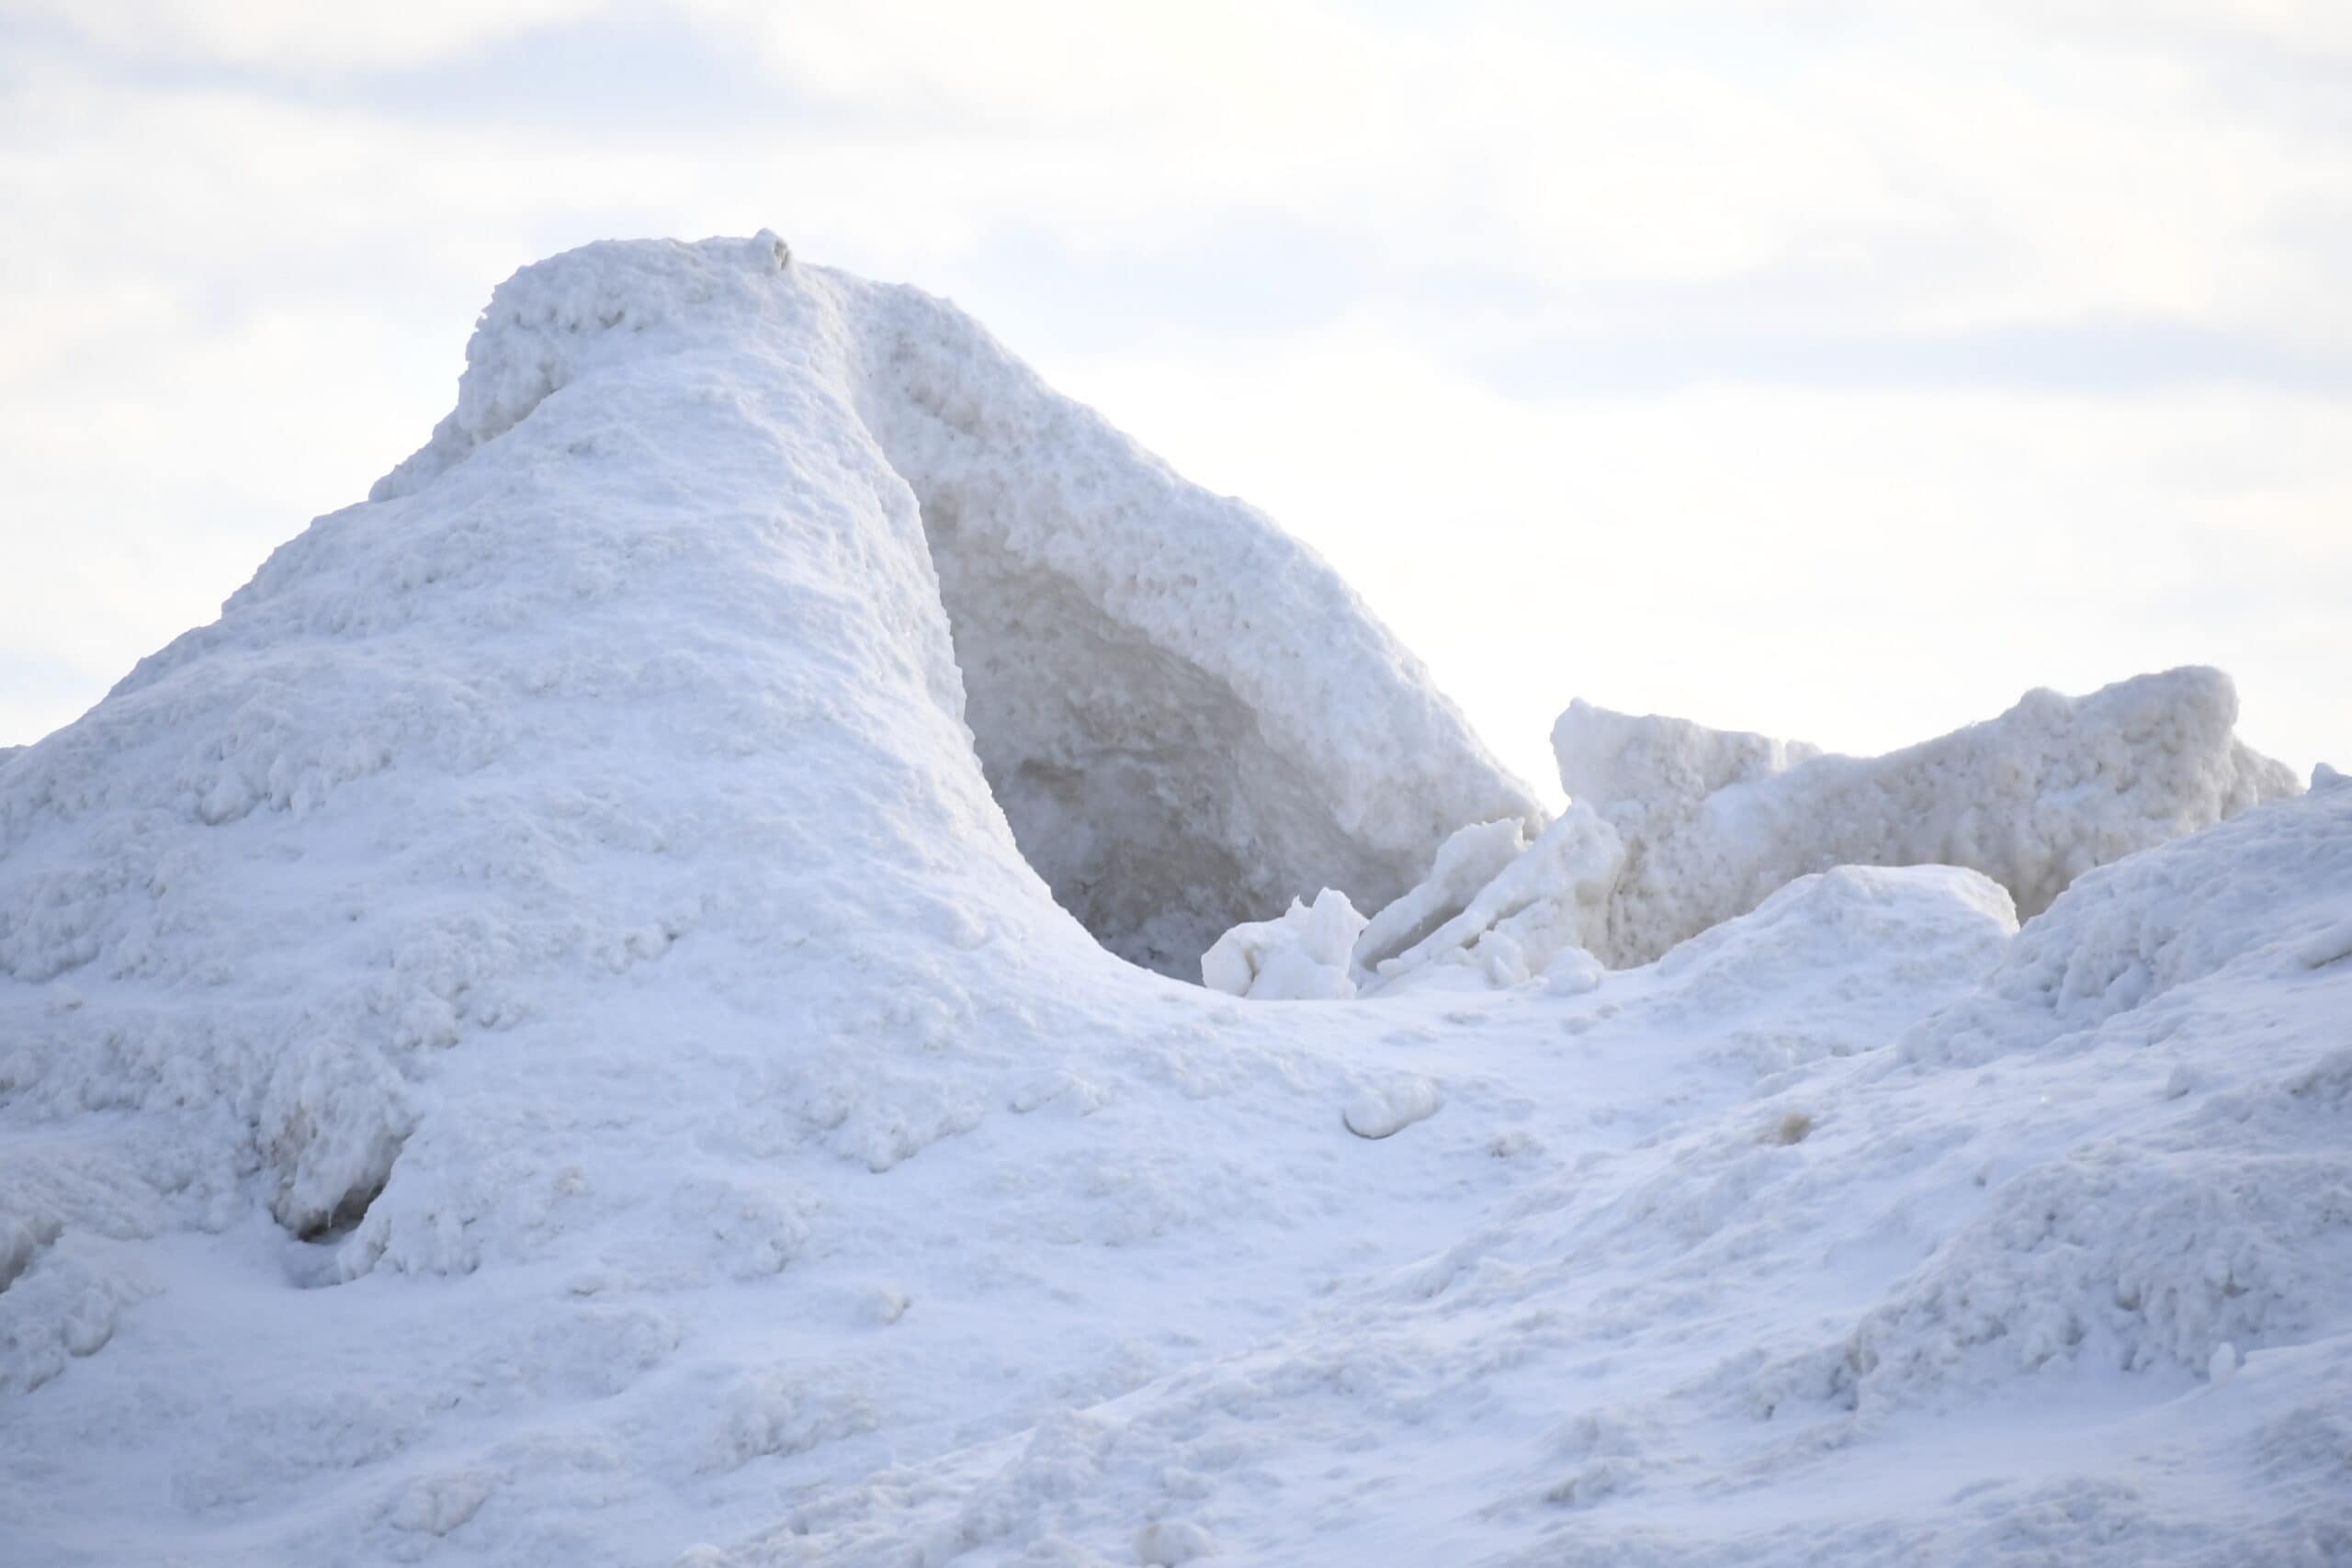 An view of an ice volcano wearing a fresh coat of powdery white snow